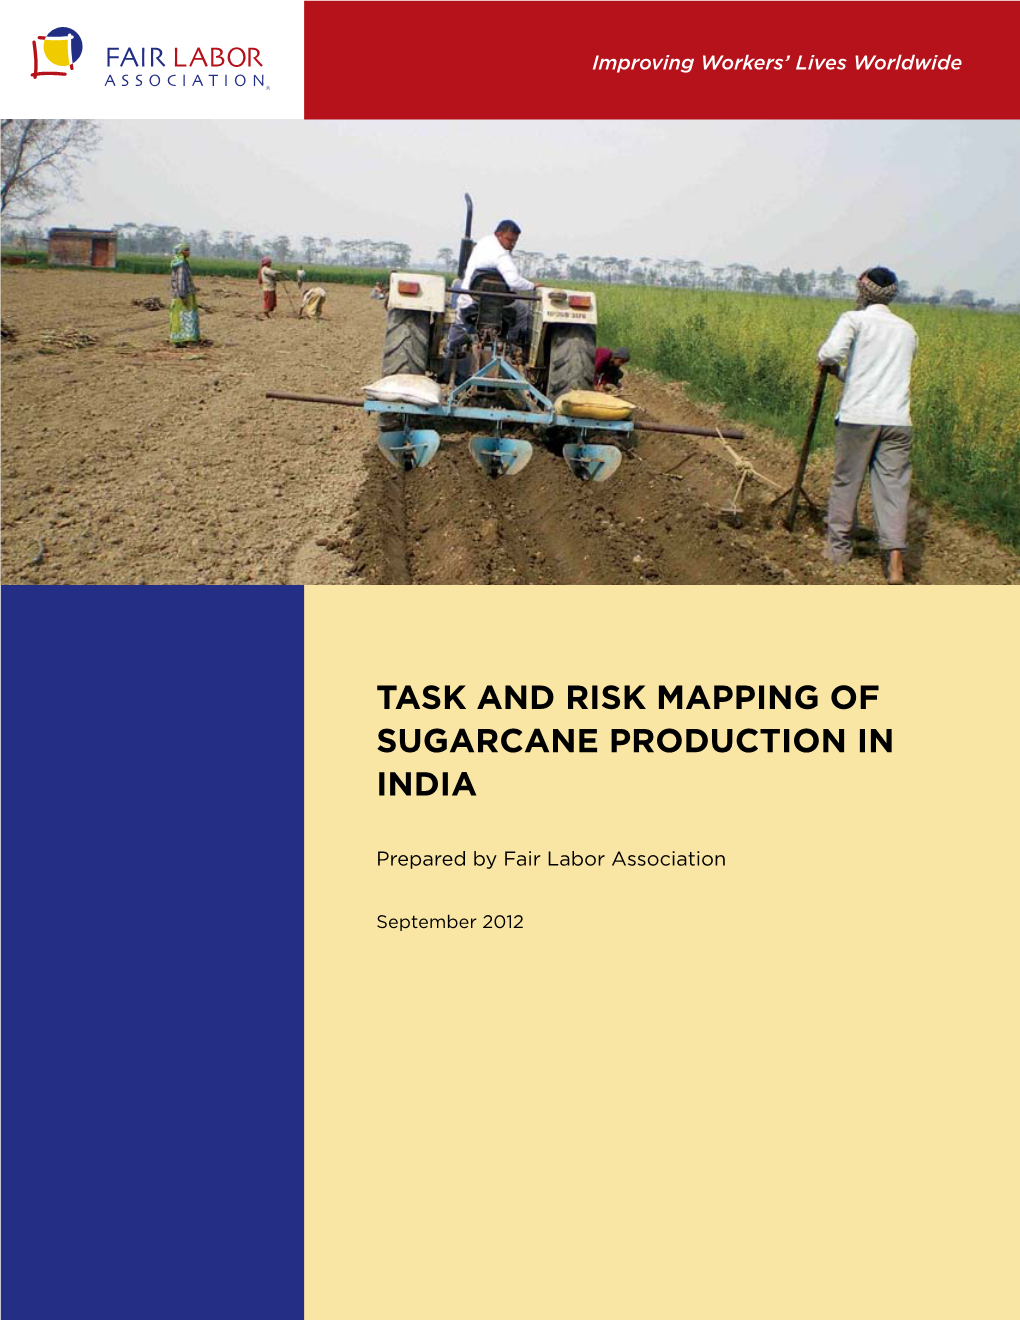 Task and Risk Mapping of Sugarcane Production in India